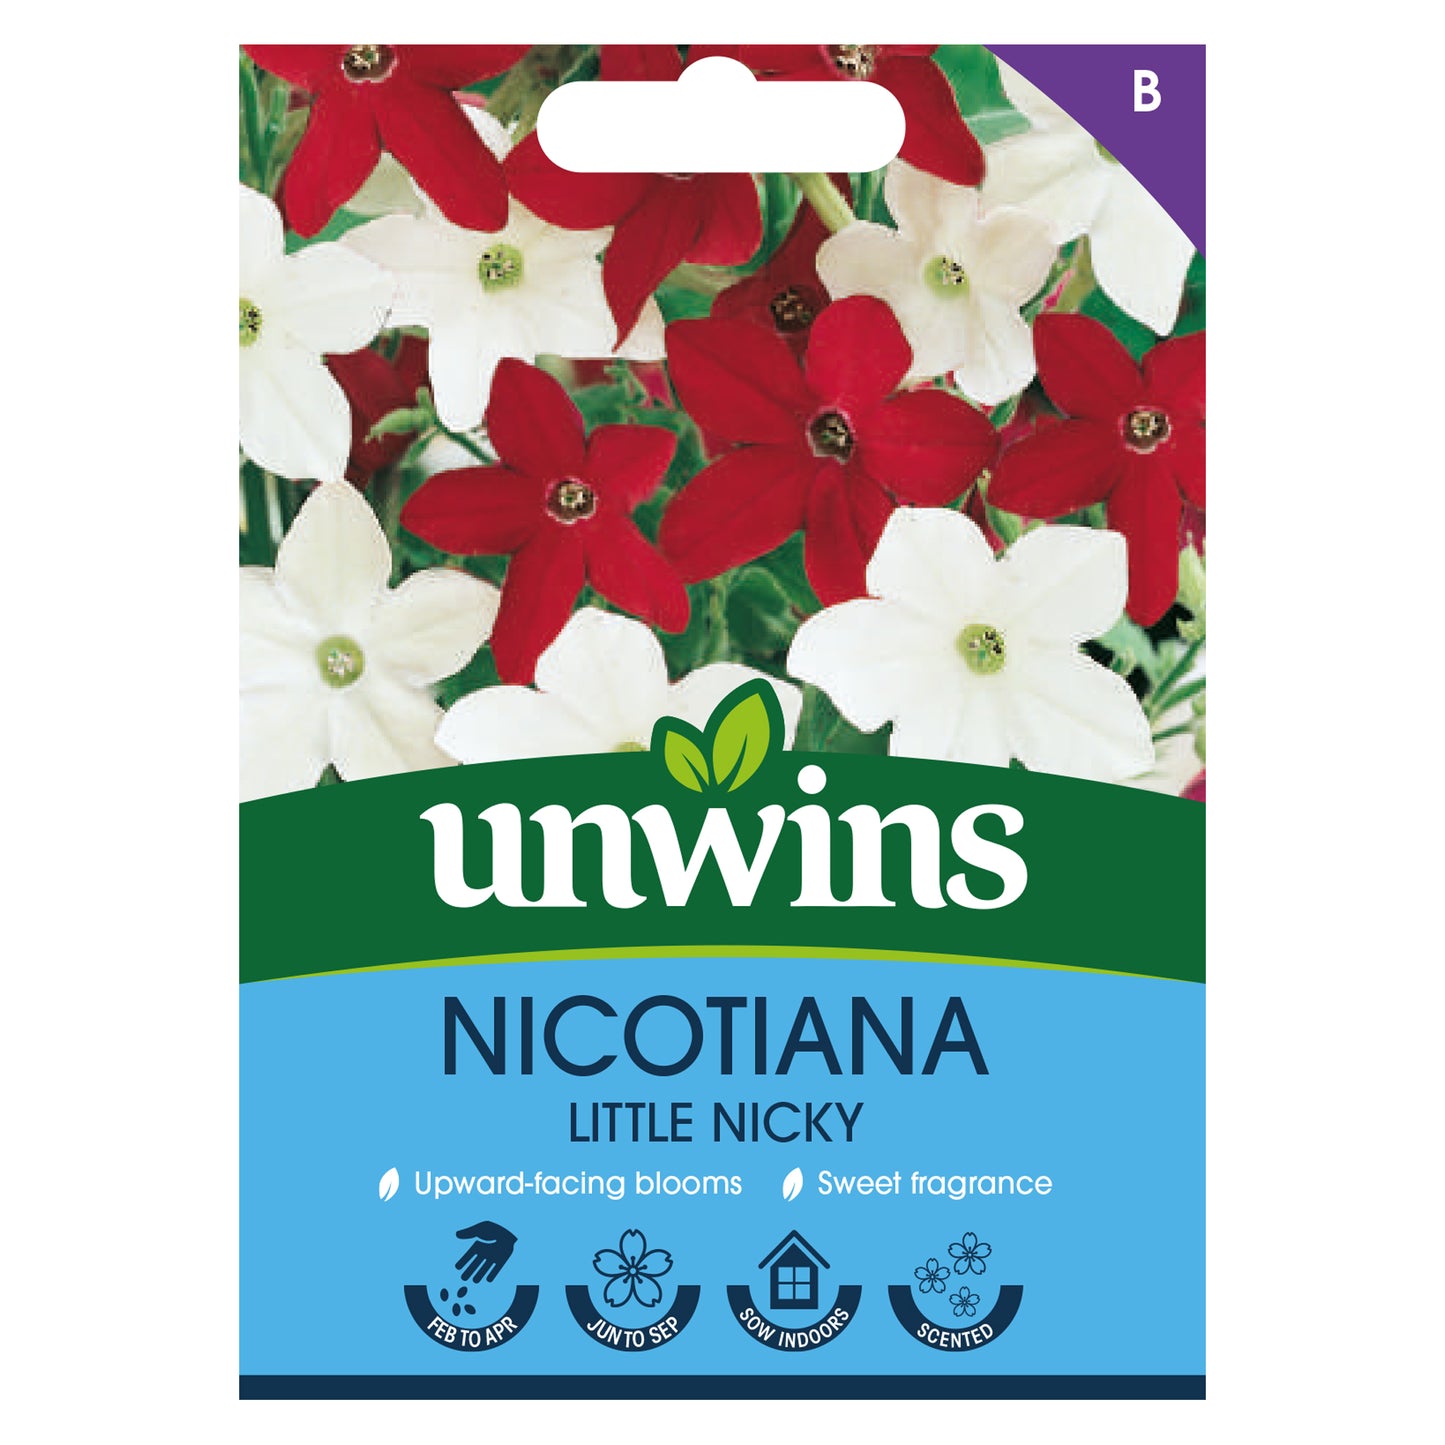 Unwins Nicotiana Little Nicky Seeds front of pack